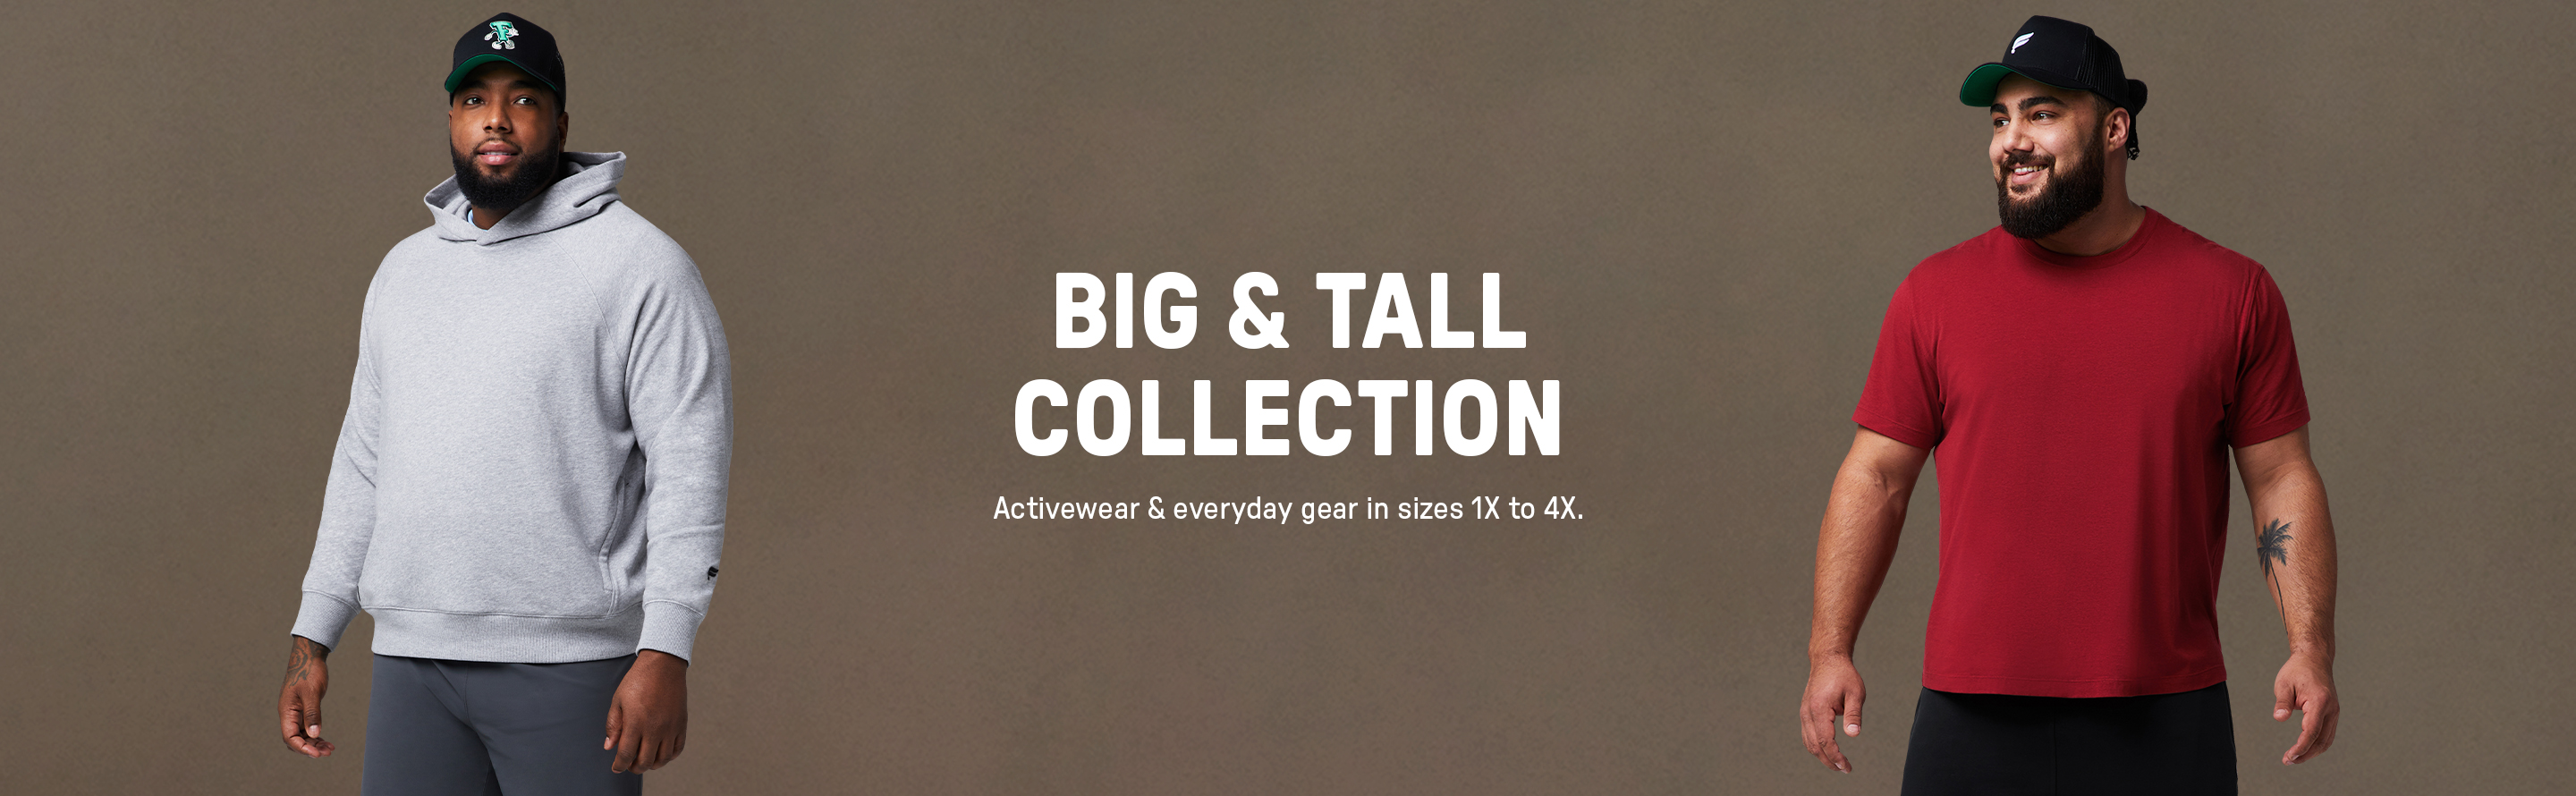 Fabletics Big & Tall Launches With Men's Sizes to 4X